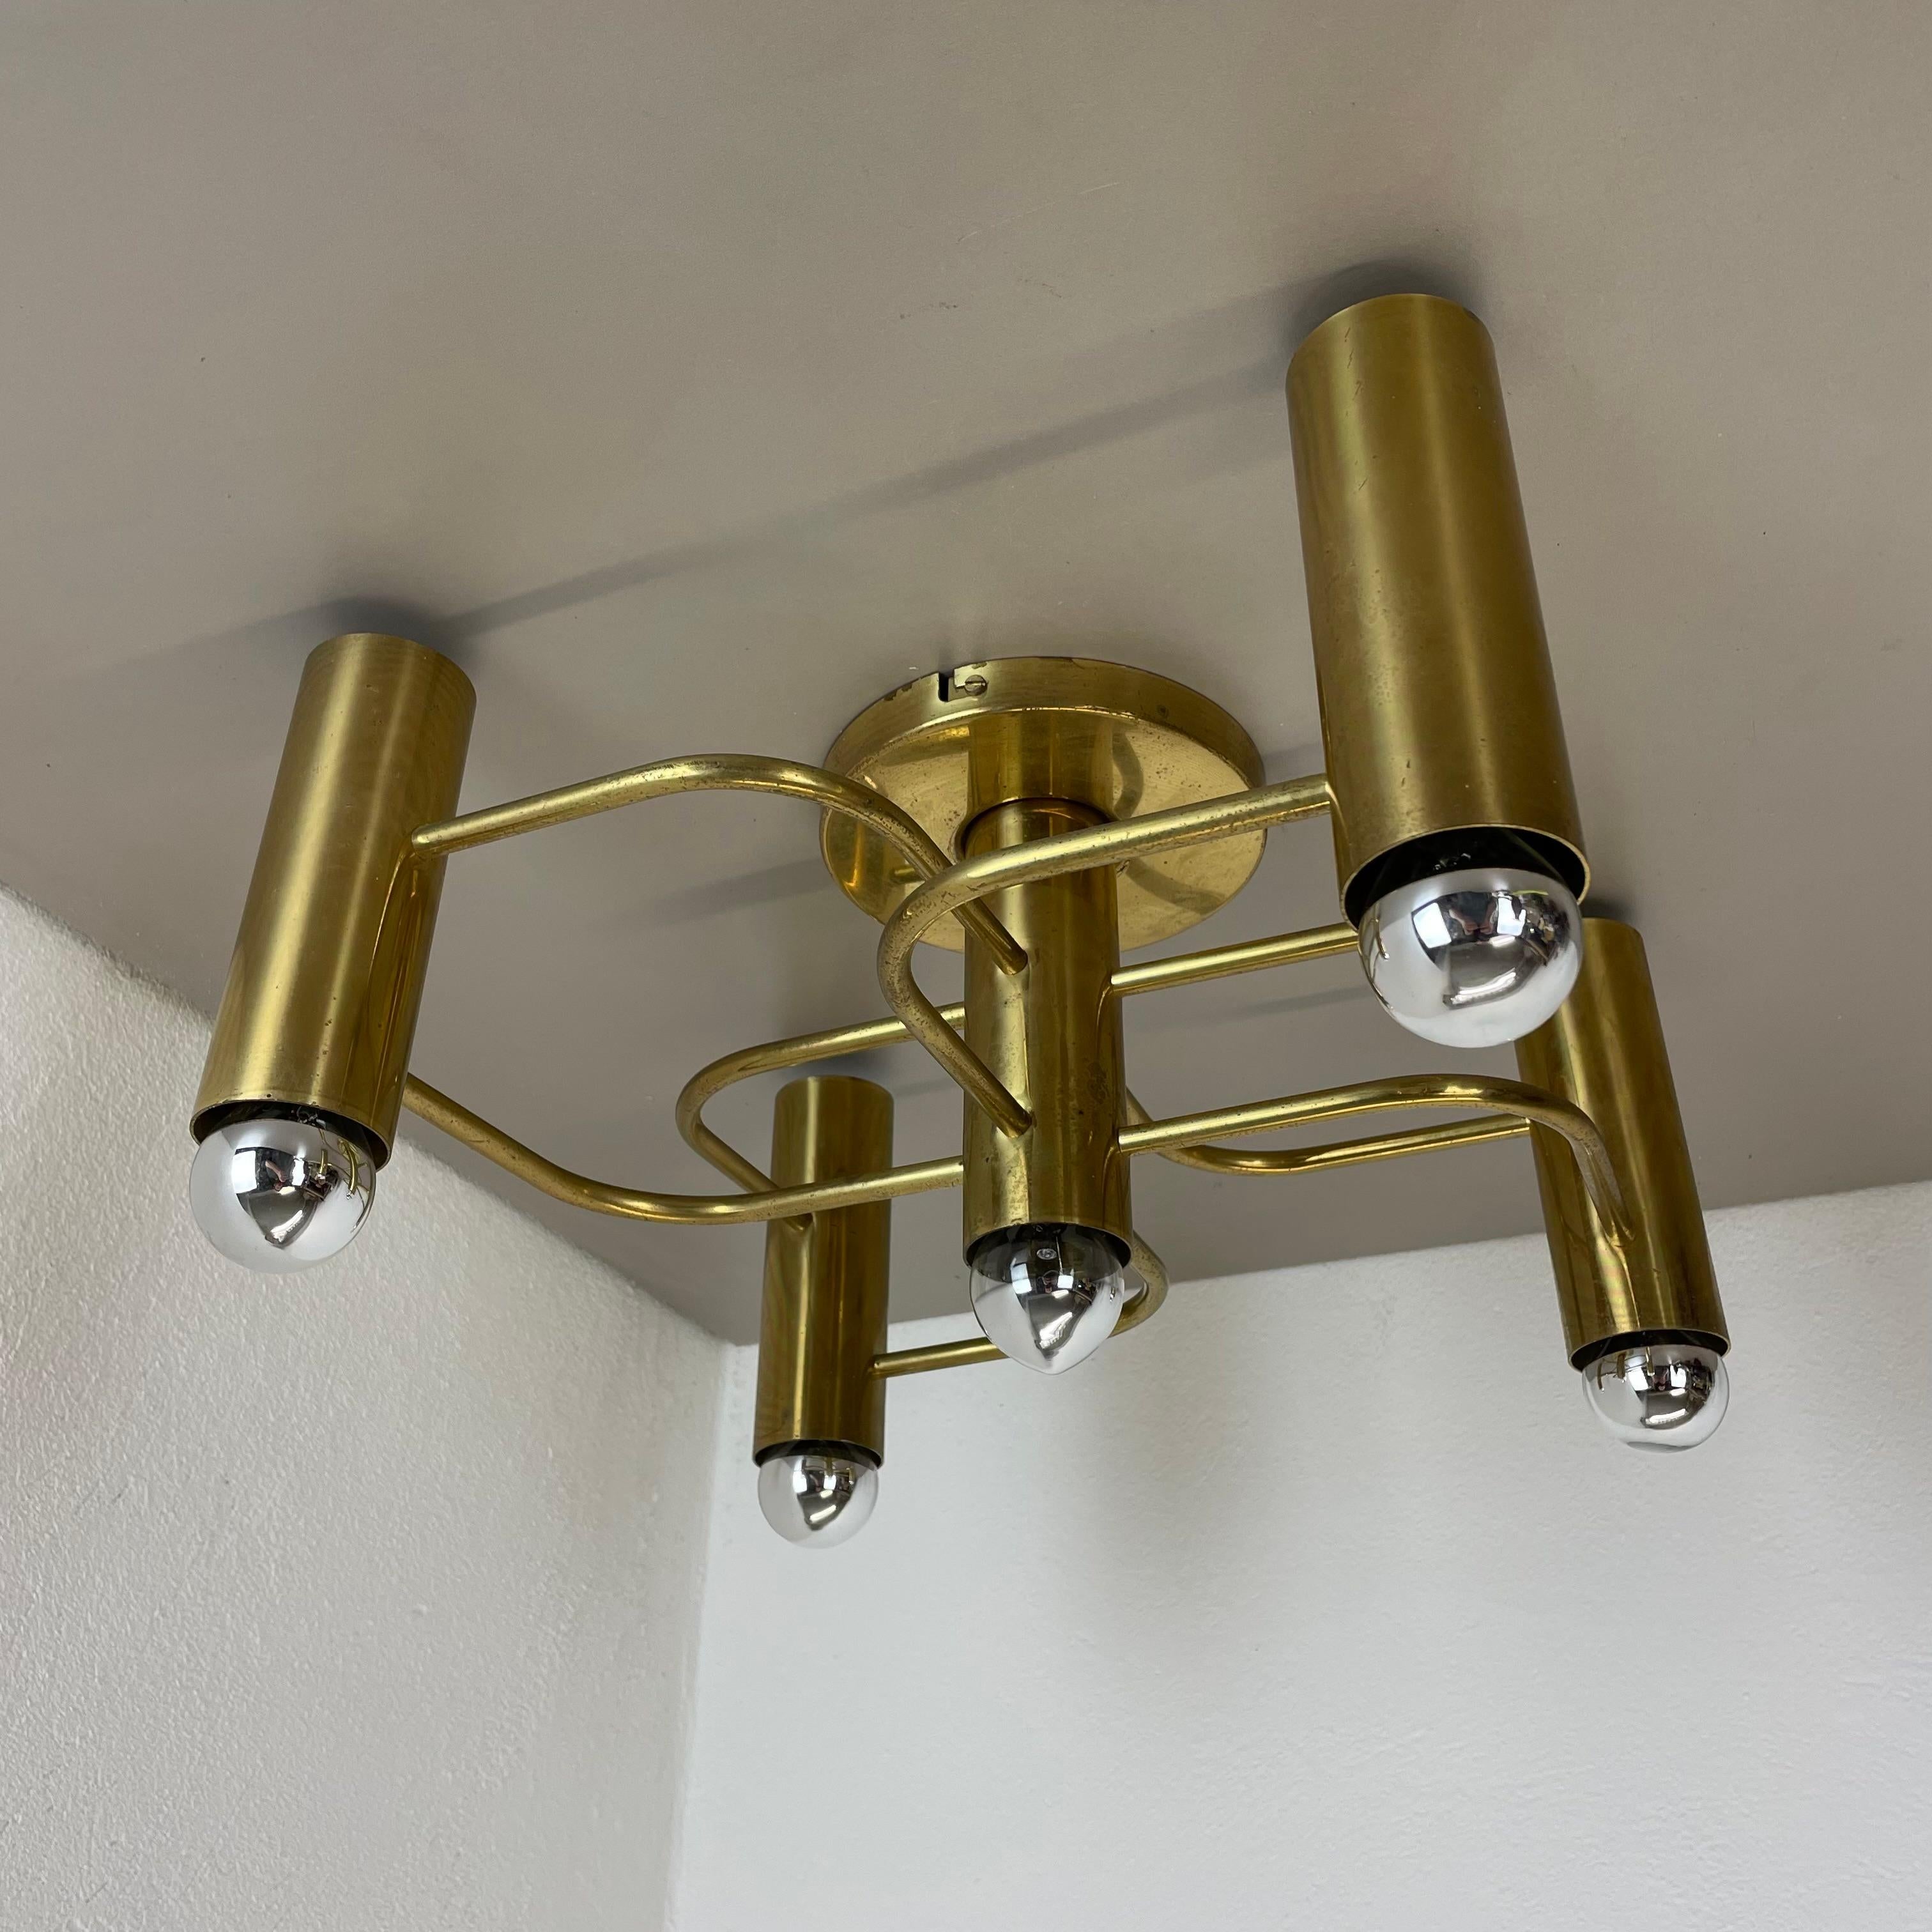 Article:

Ceiling light with 5 lights



Producer: LEOLA Leuchten, Germany

Designer: Gaetano Sciolari

Origin: Germany



Age:

1970s



This modernist light was produced in Germany in the 1970s by LEOLA Leuchten. It is made from solid metal and